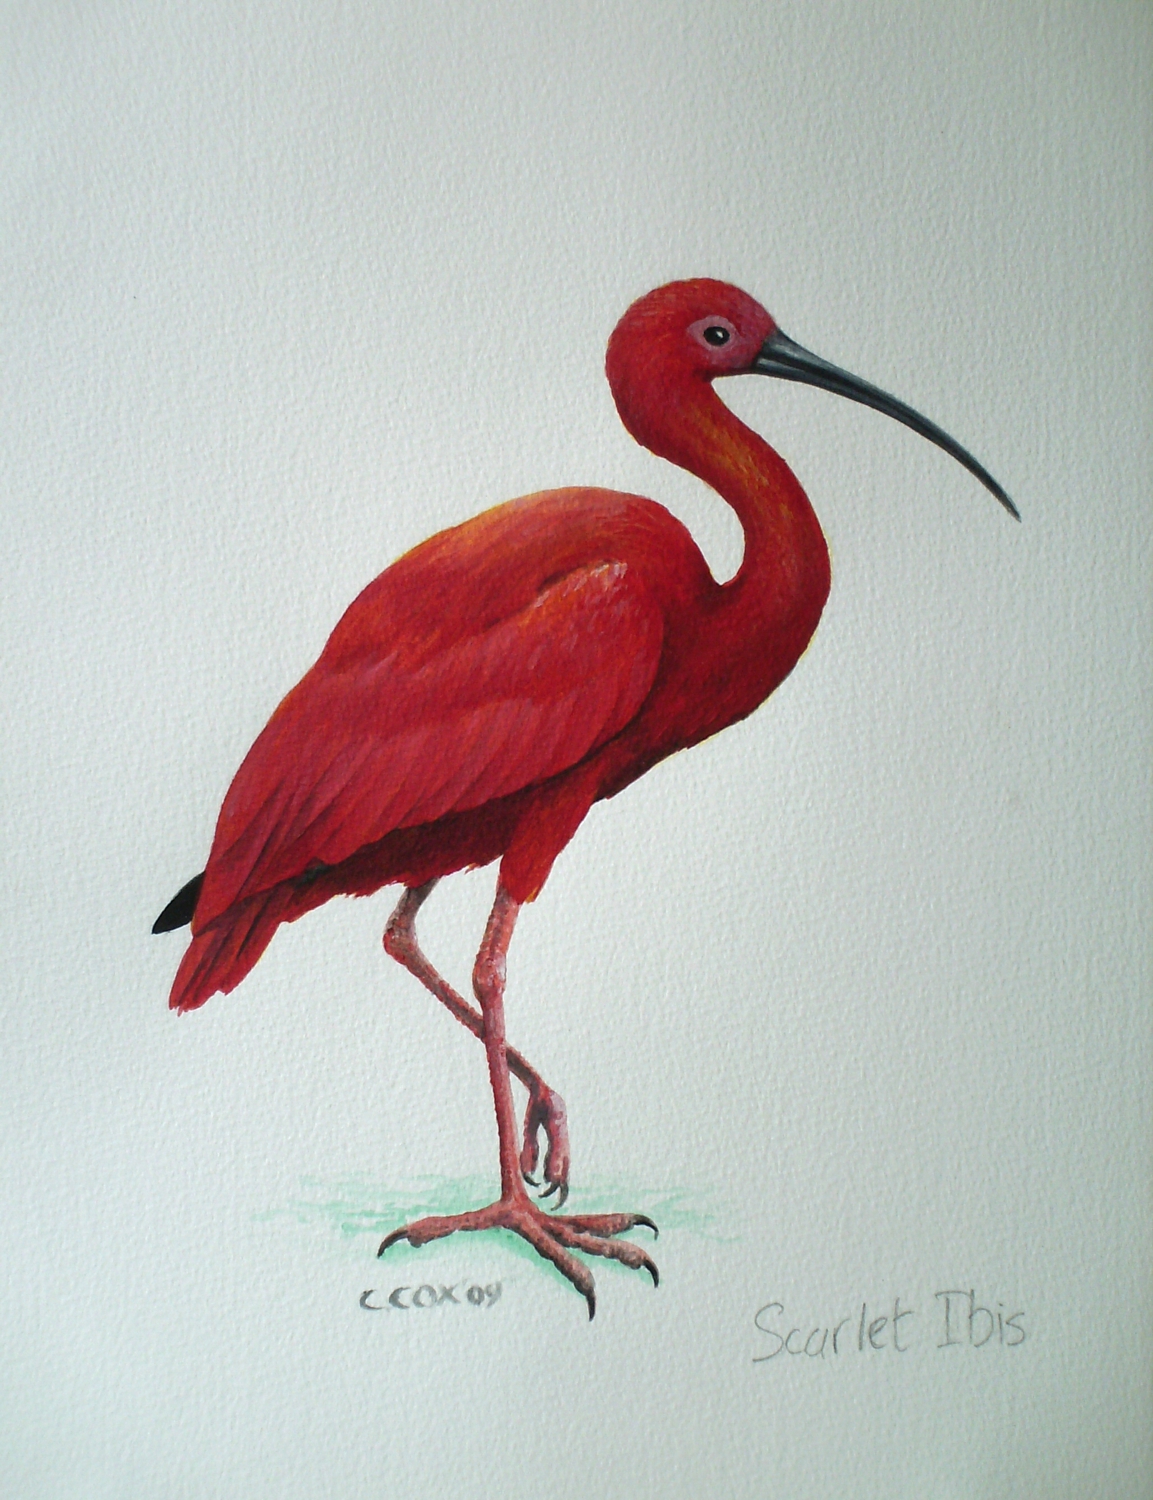 Scarlet Ibis, Acrylic on paper, 16x12"